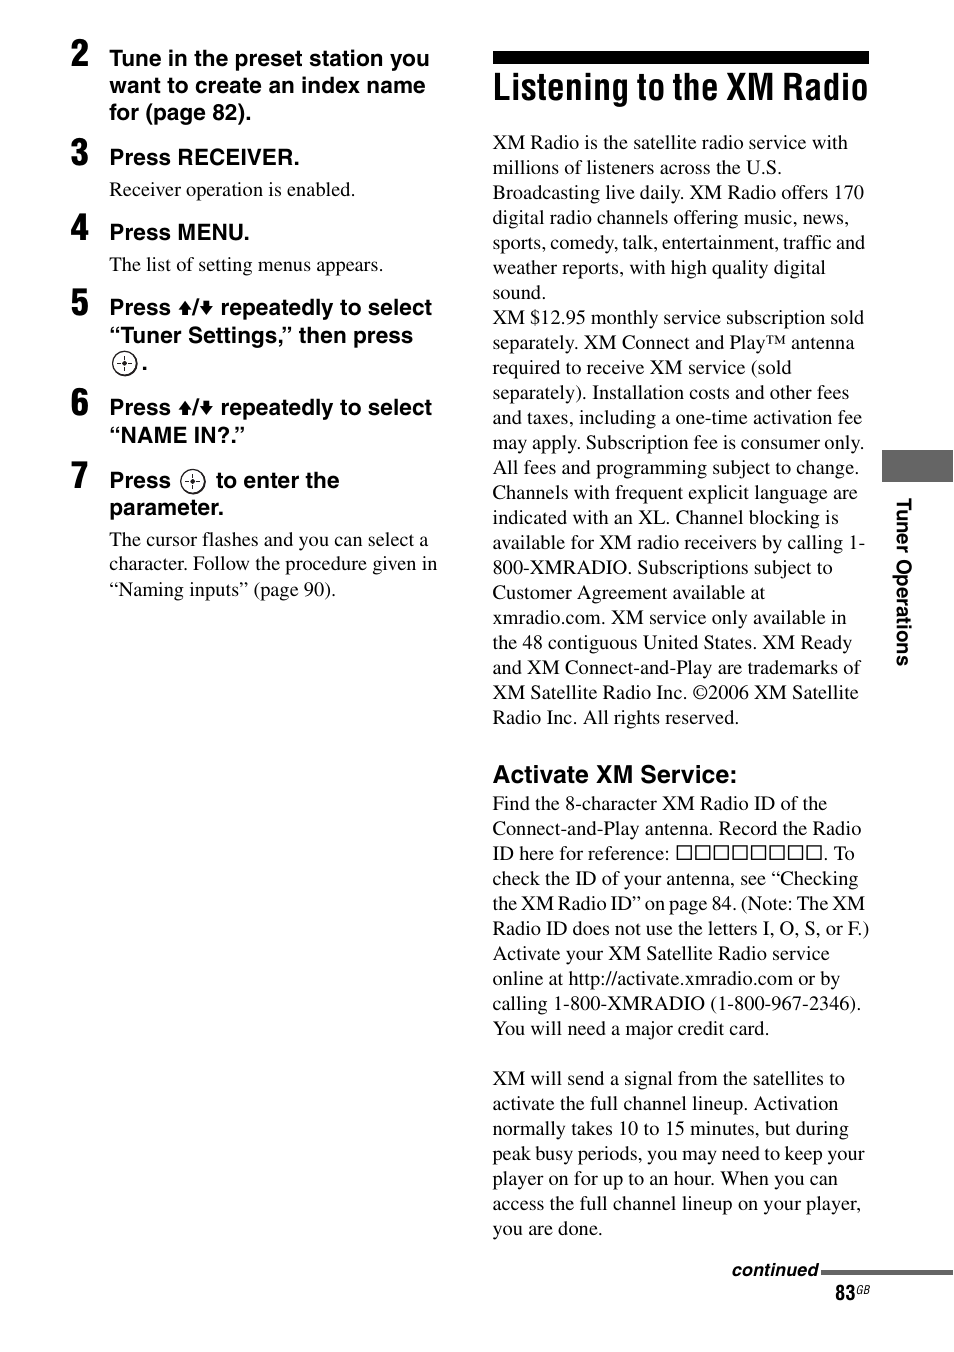 Listening to the xm radio, E 83 | Sony STR-DG1000 User Manual | Page 83 / 123